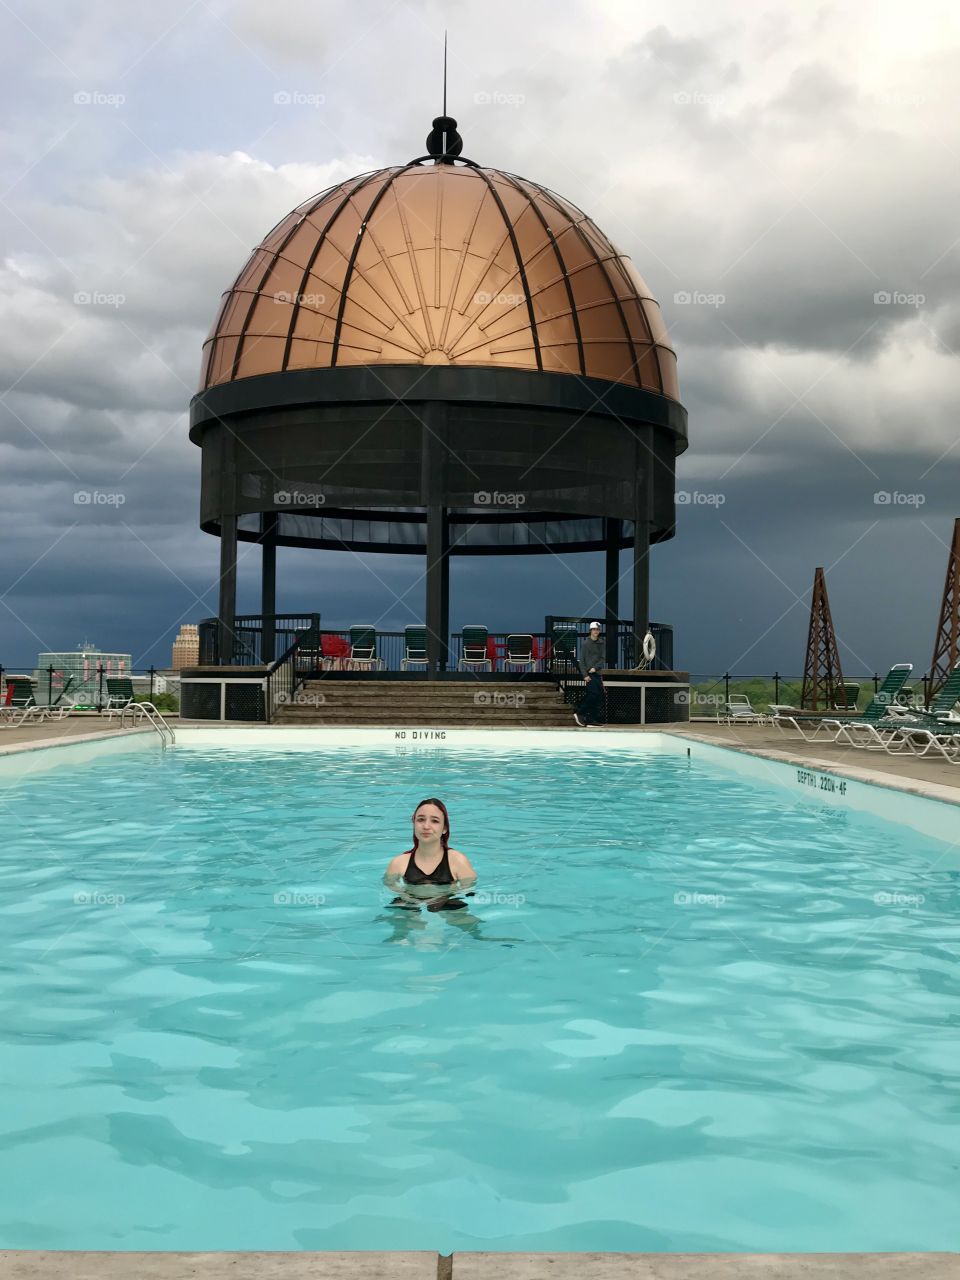 Just before a thunderstorm (May 2-4 weekend Canada) Roof top pool at Sheridan On the falls (model electric_godess85 on instagram)